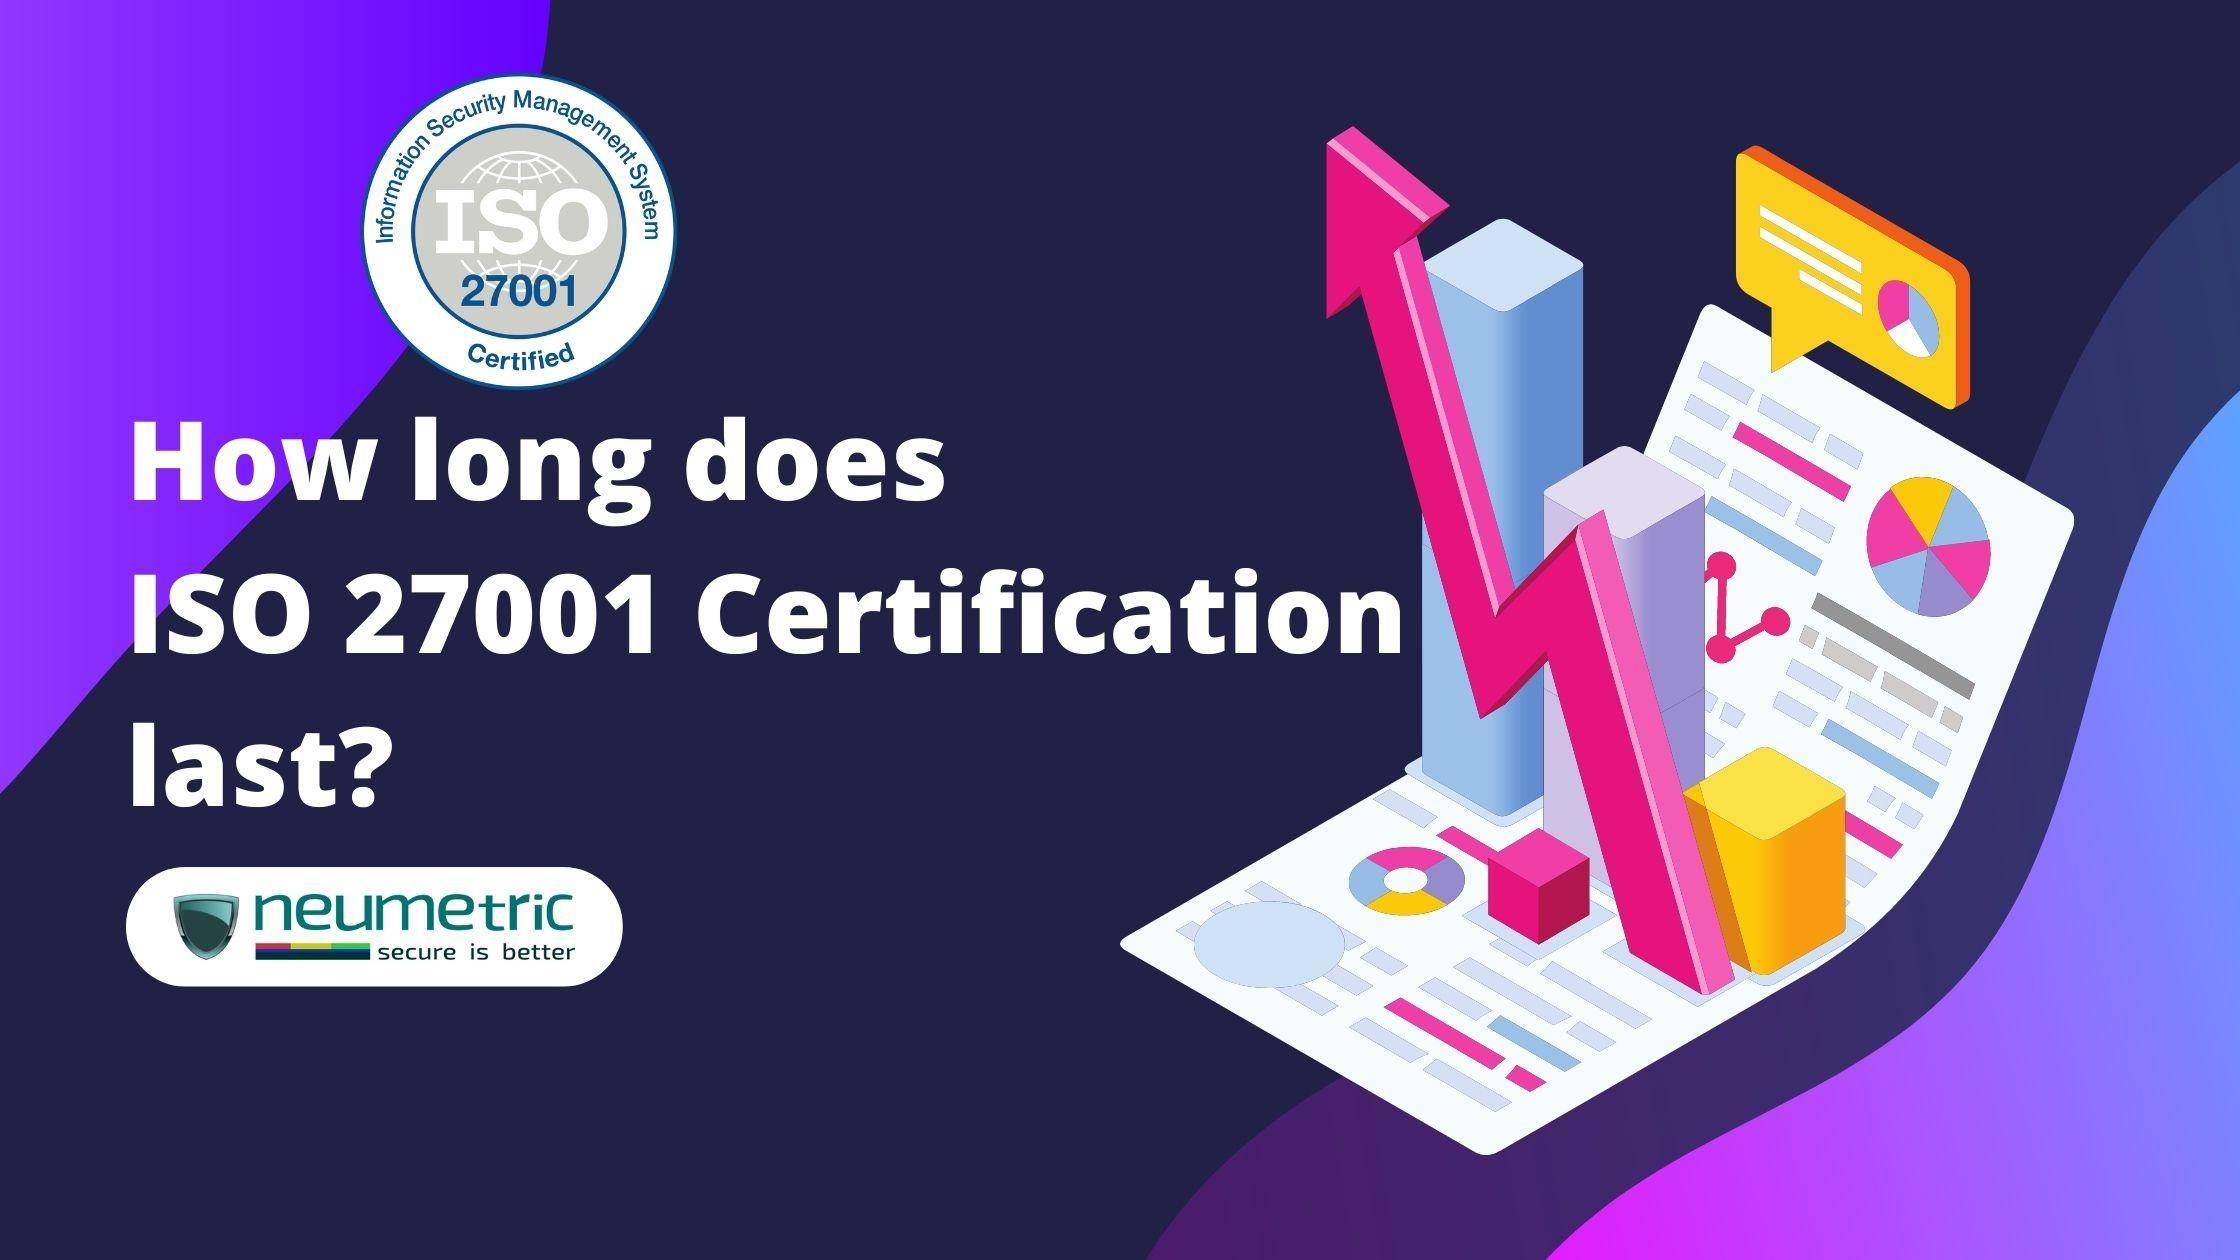 How long does ISO 27001 Certification last?